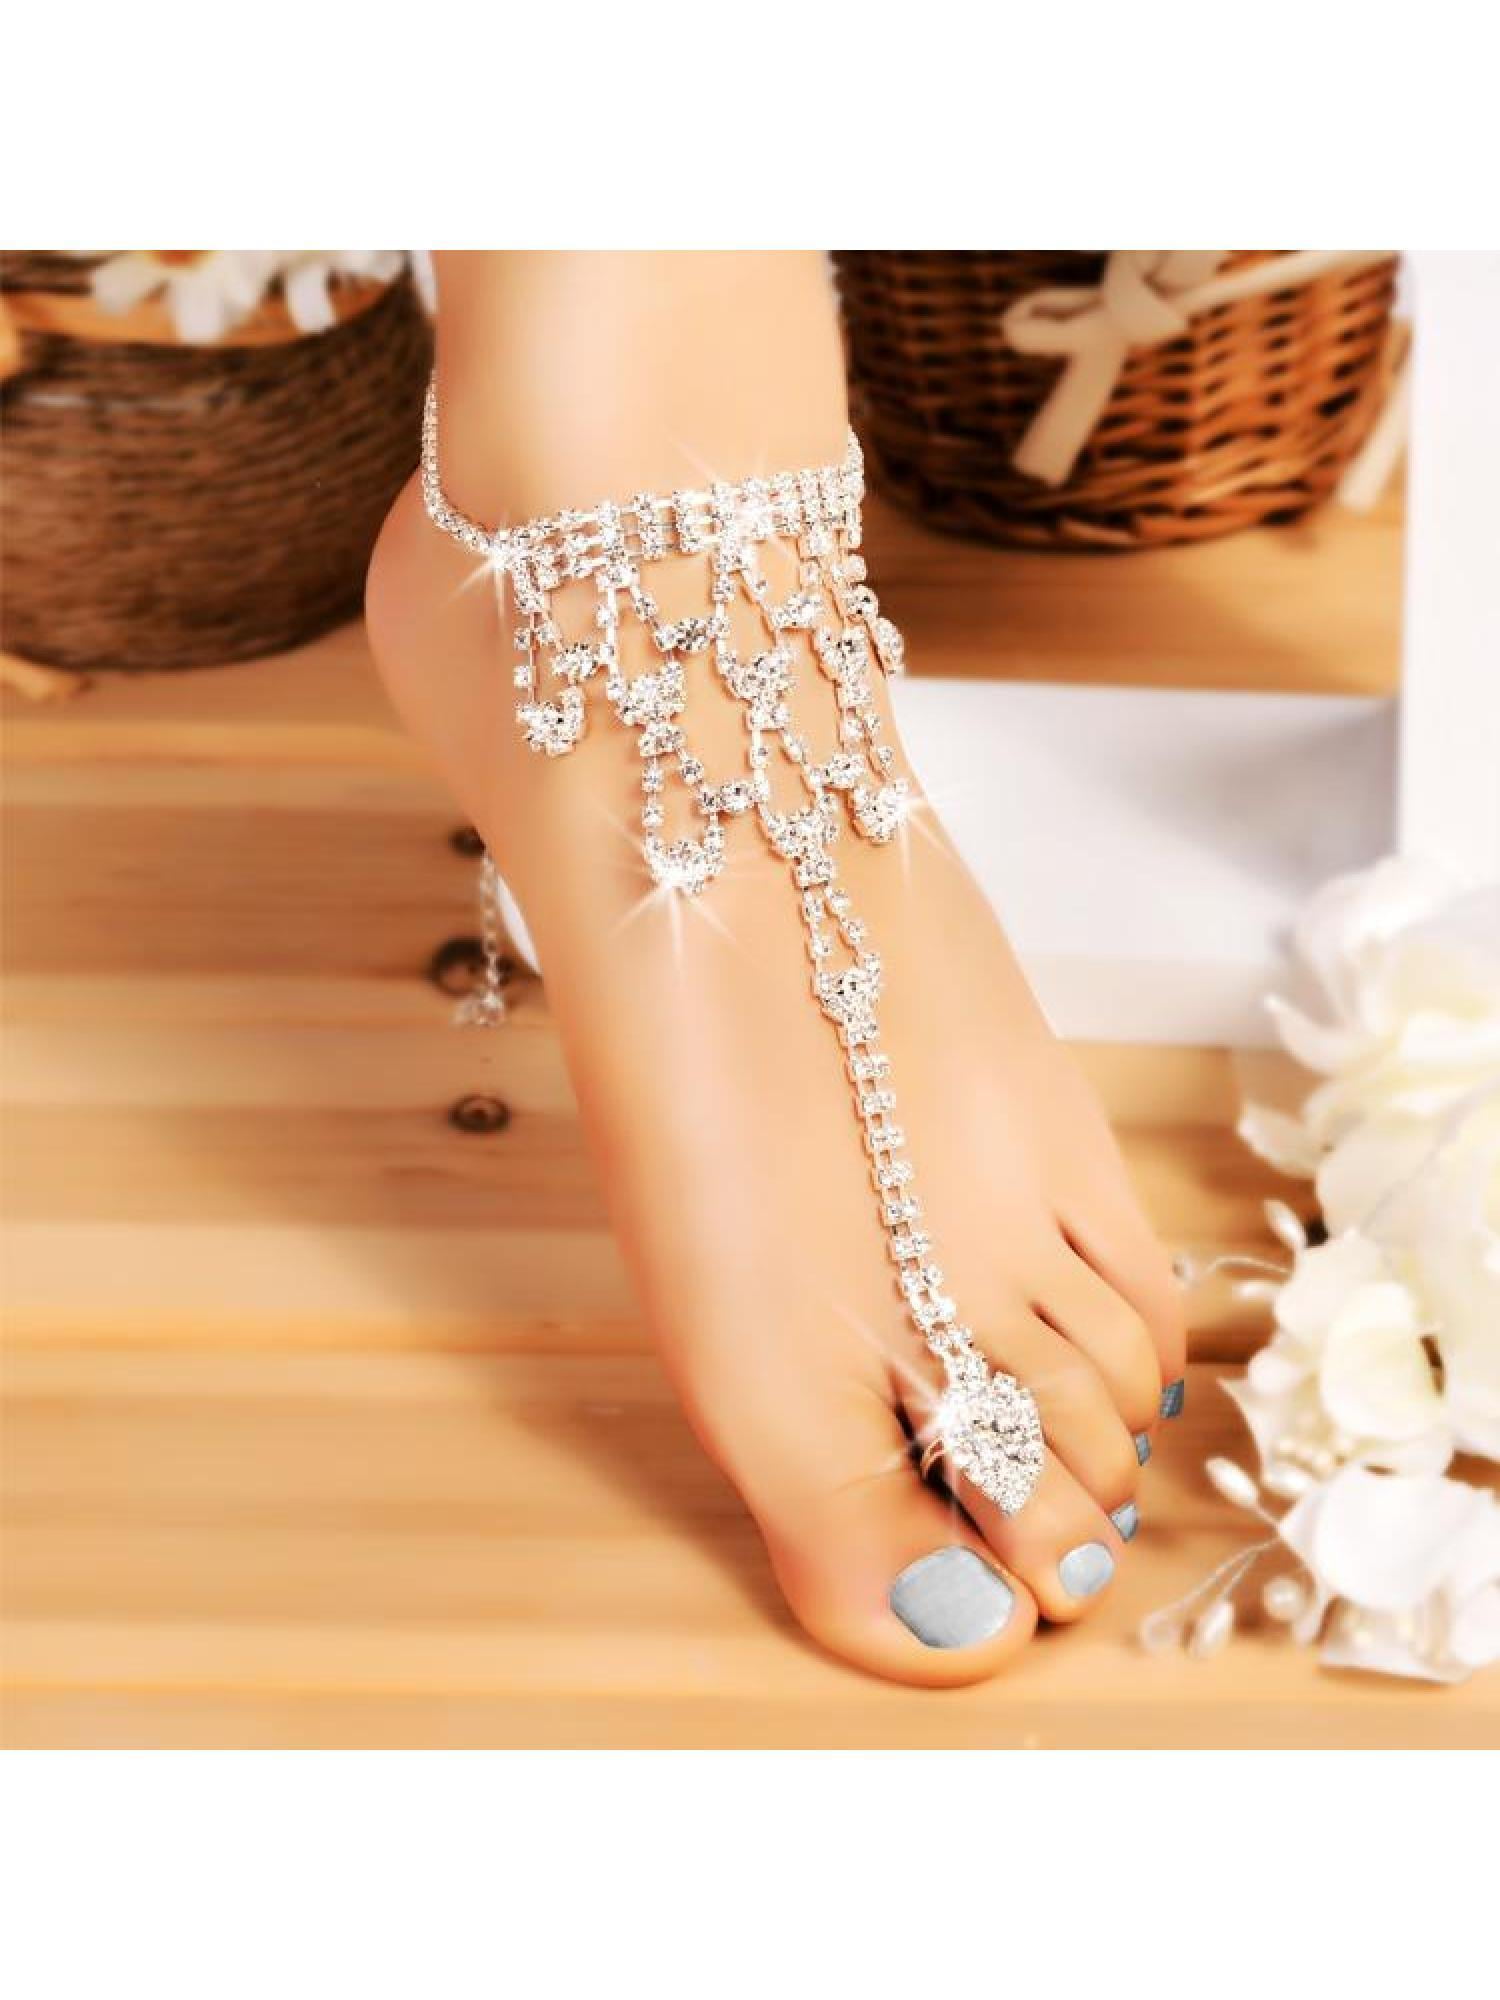 Jewelry Foot Silver Crystal Chain Anklet Ankle Bracelet Barefoot Sandal Beach 